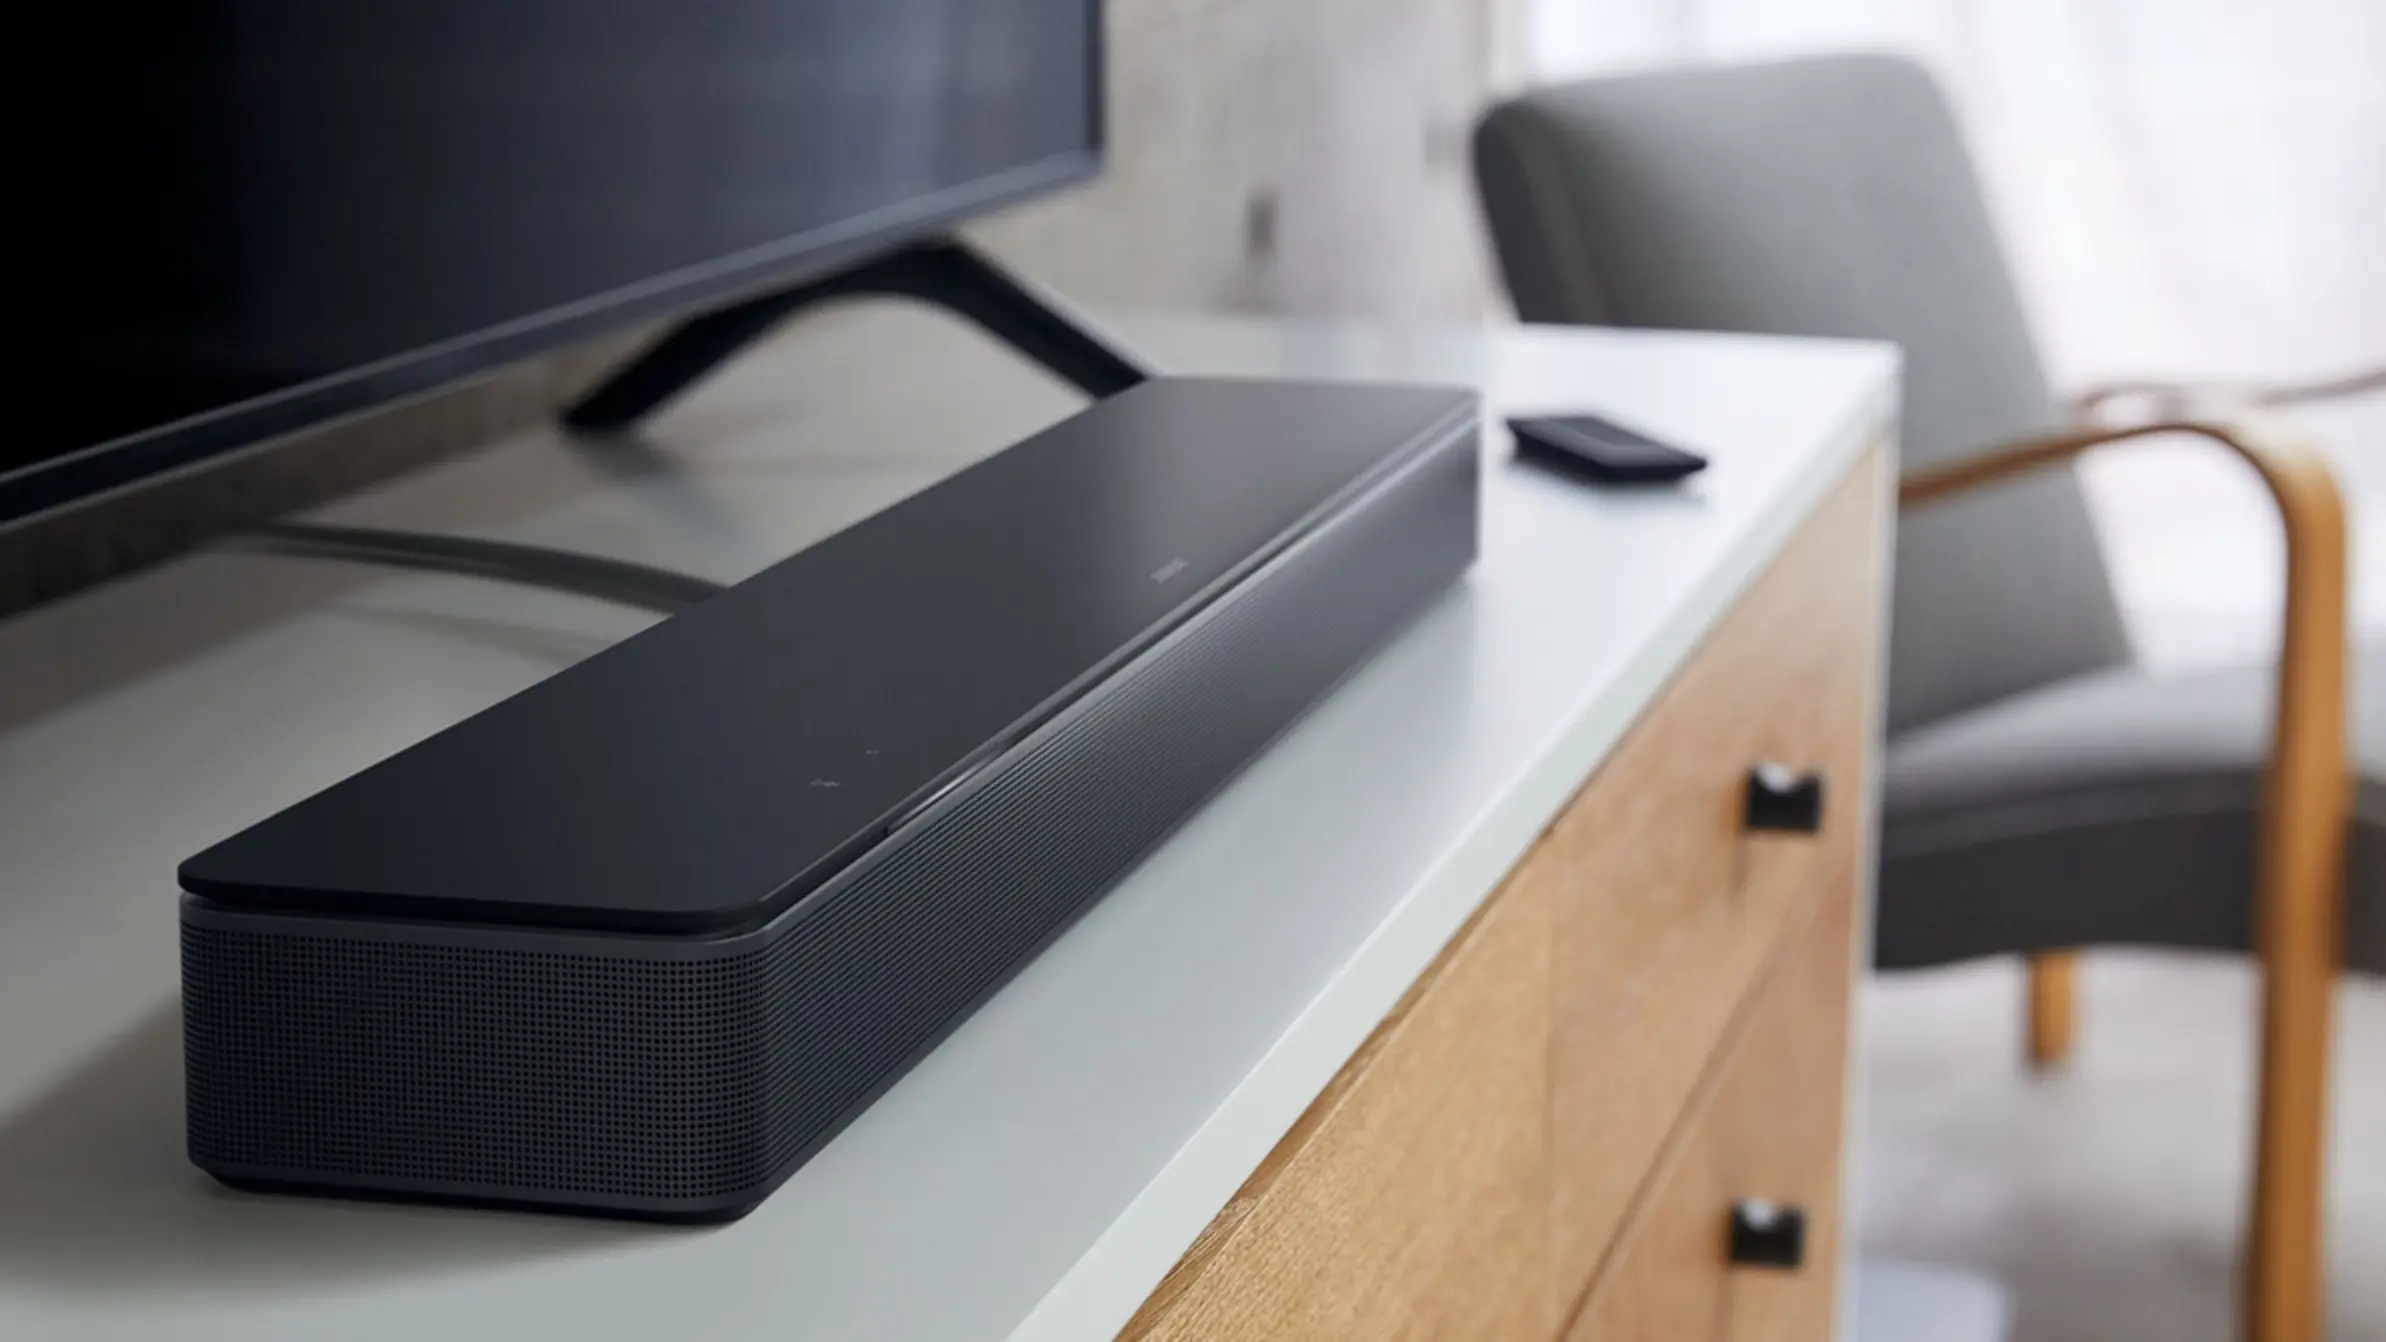 The 5 Best Small Soundbars Of 2022 [Buyer’s Guide]